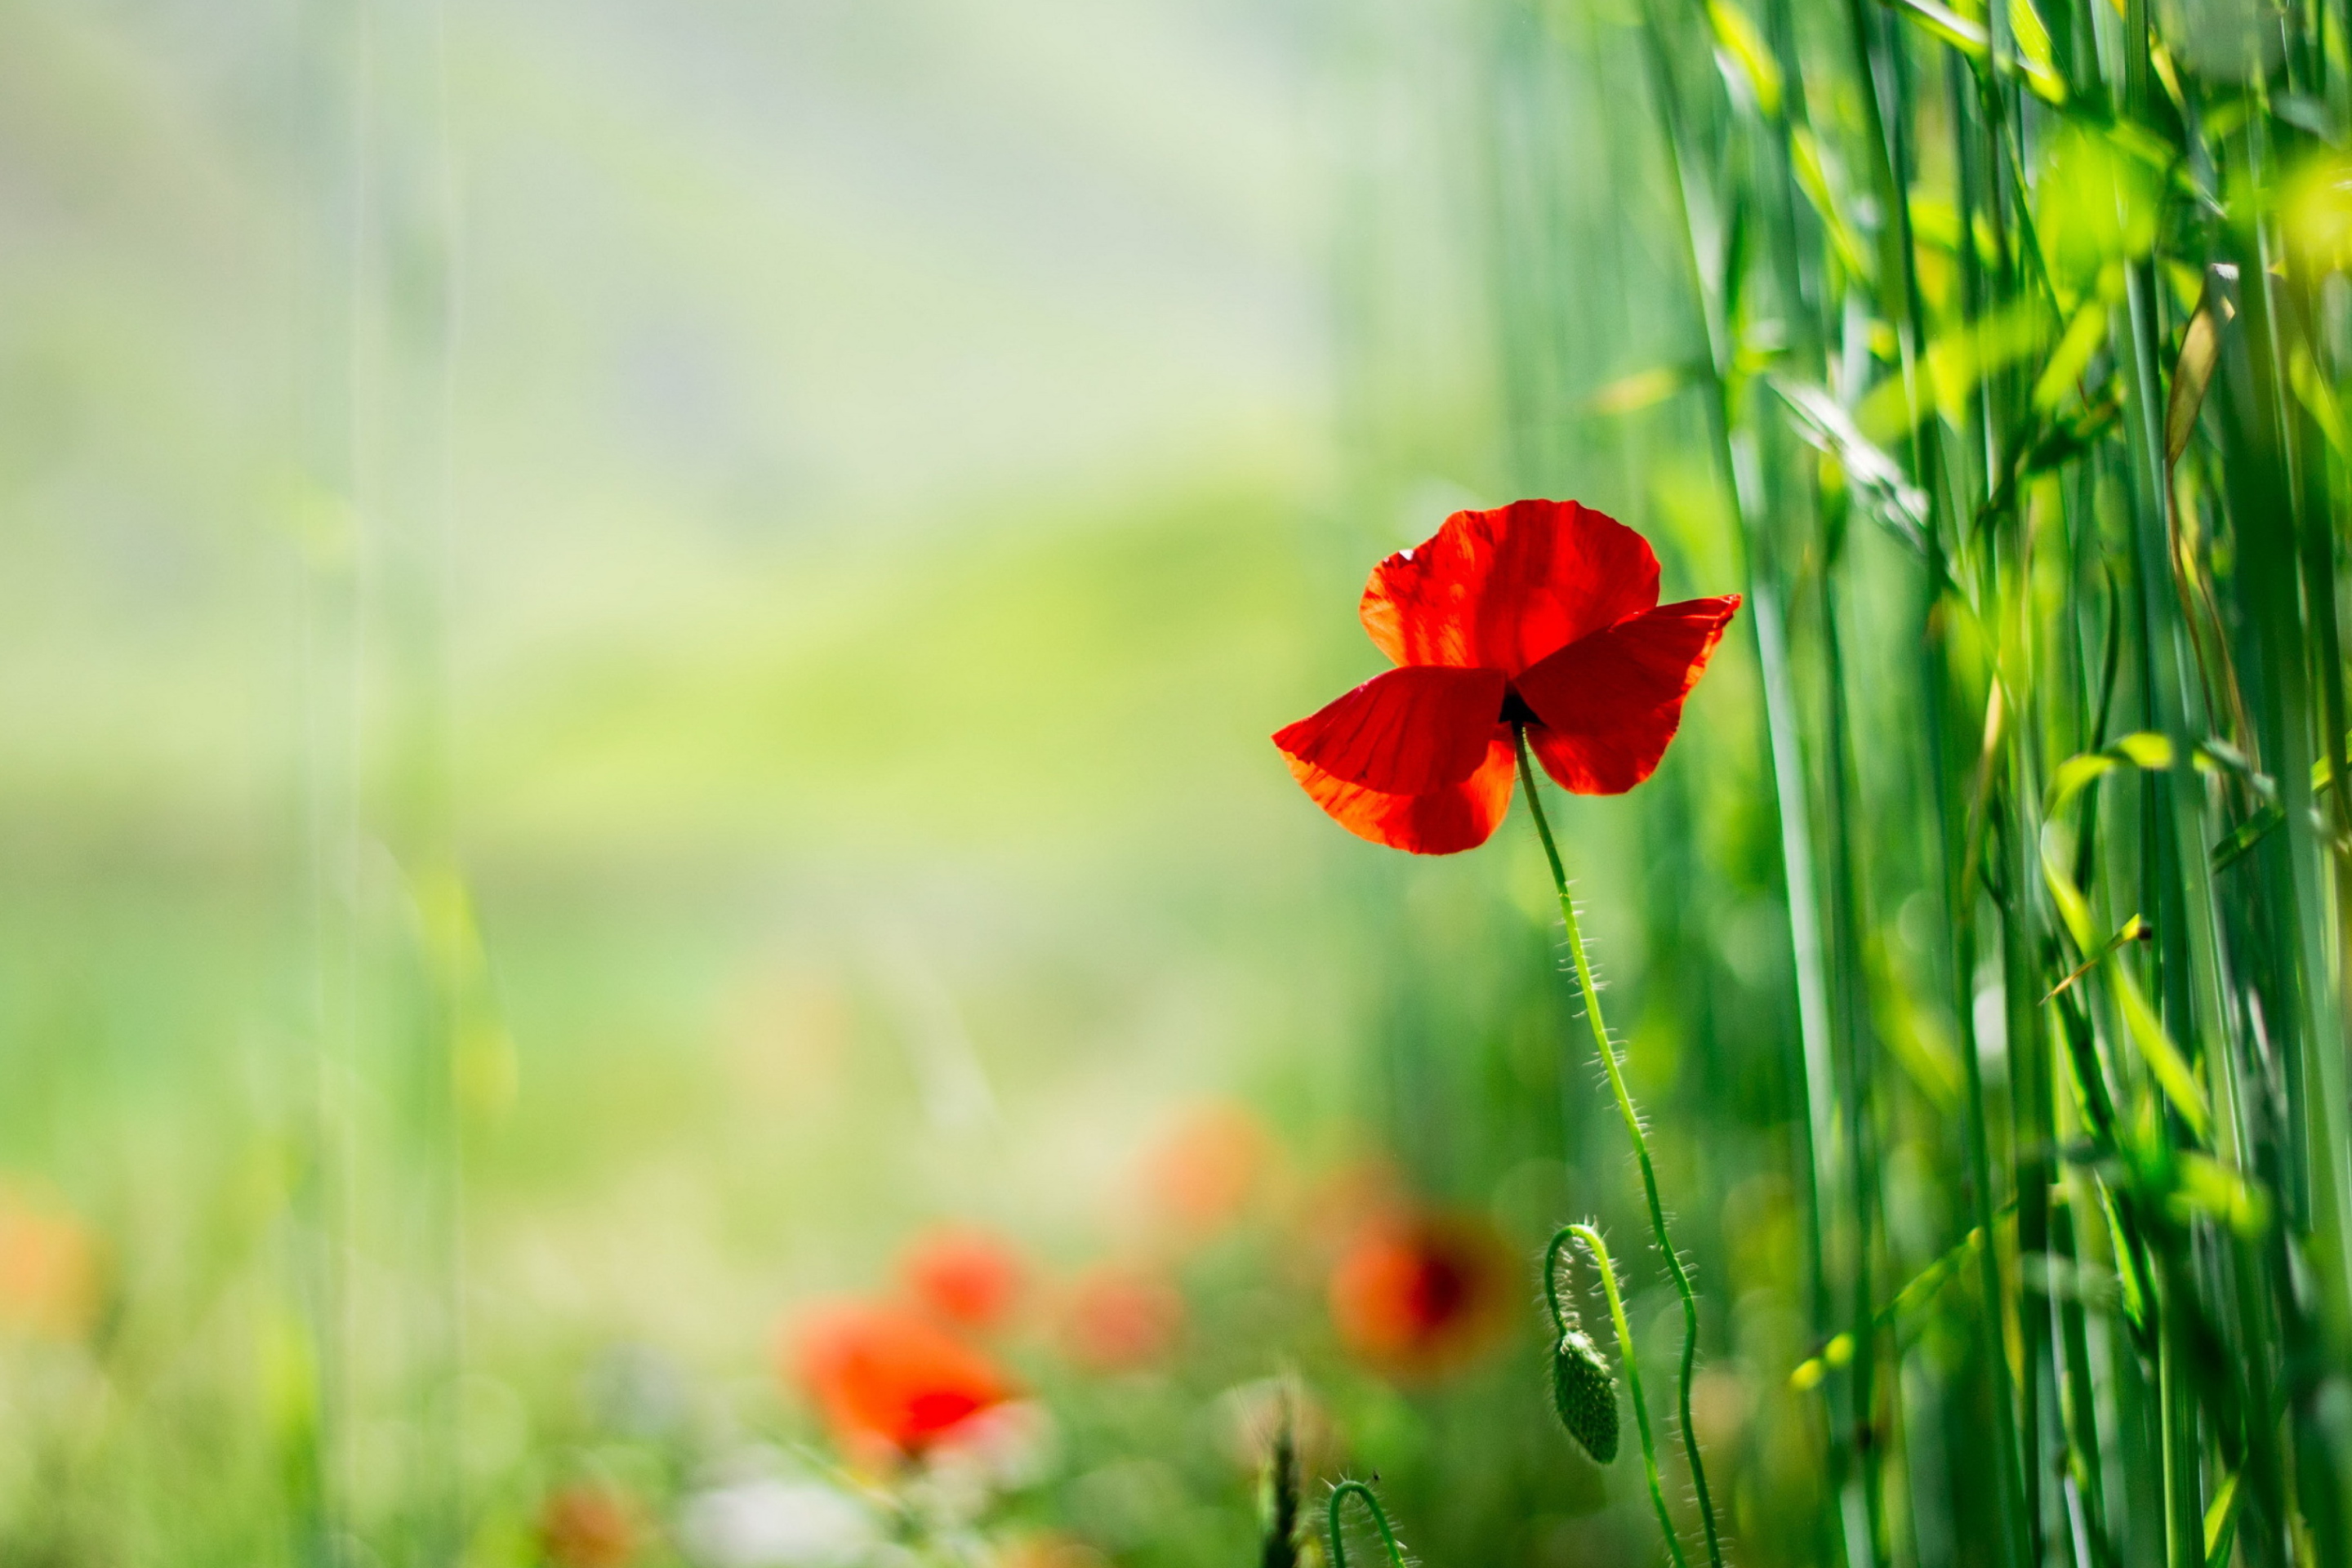 Red Poppy And Green Grass wallpaper 2880x1920